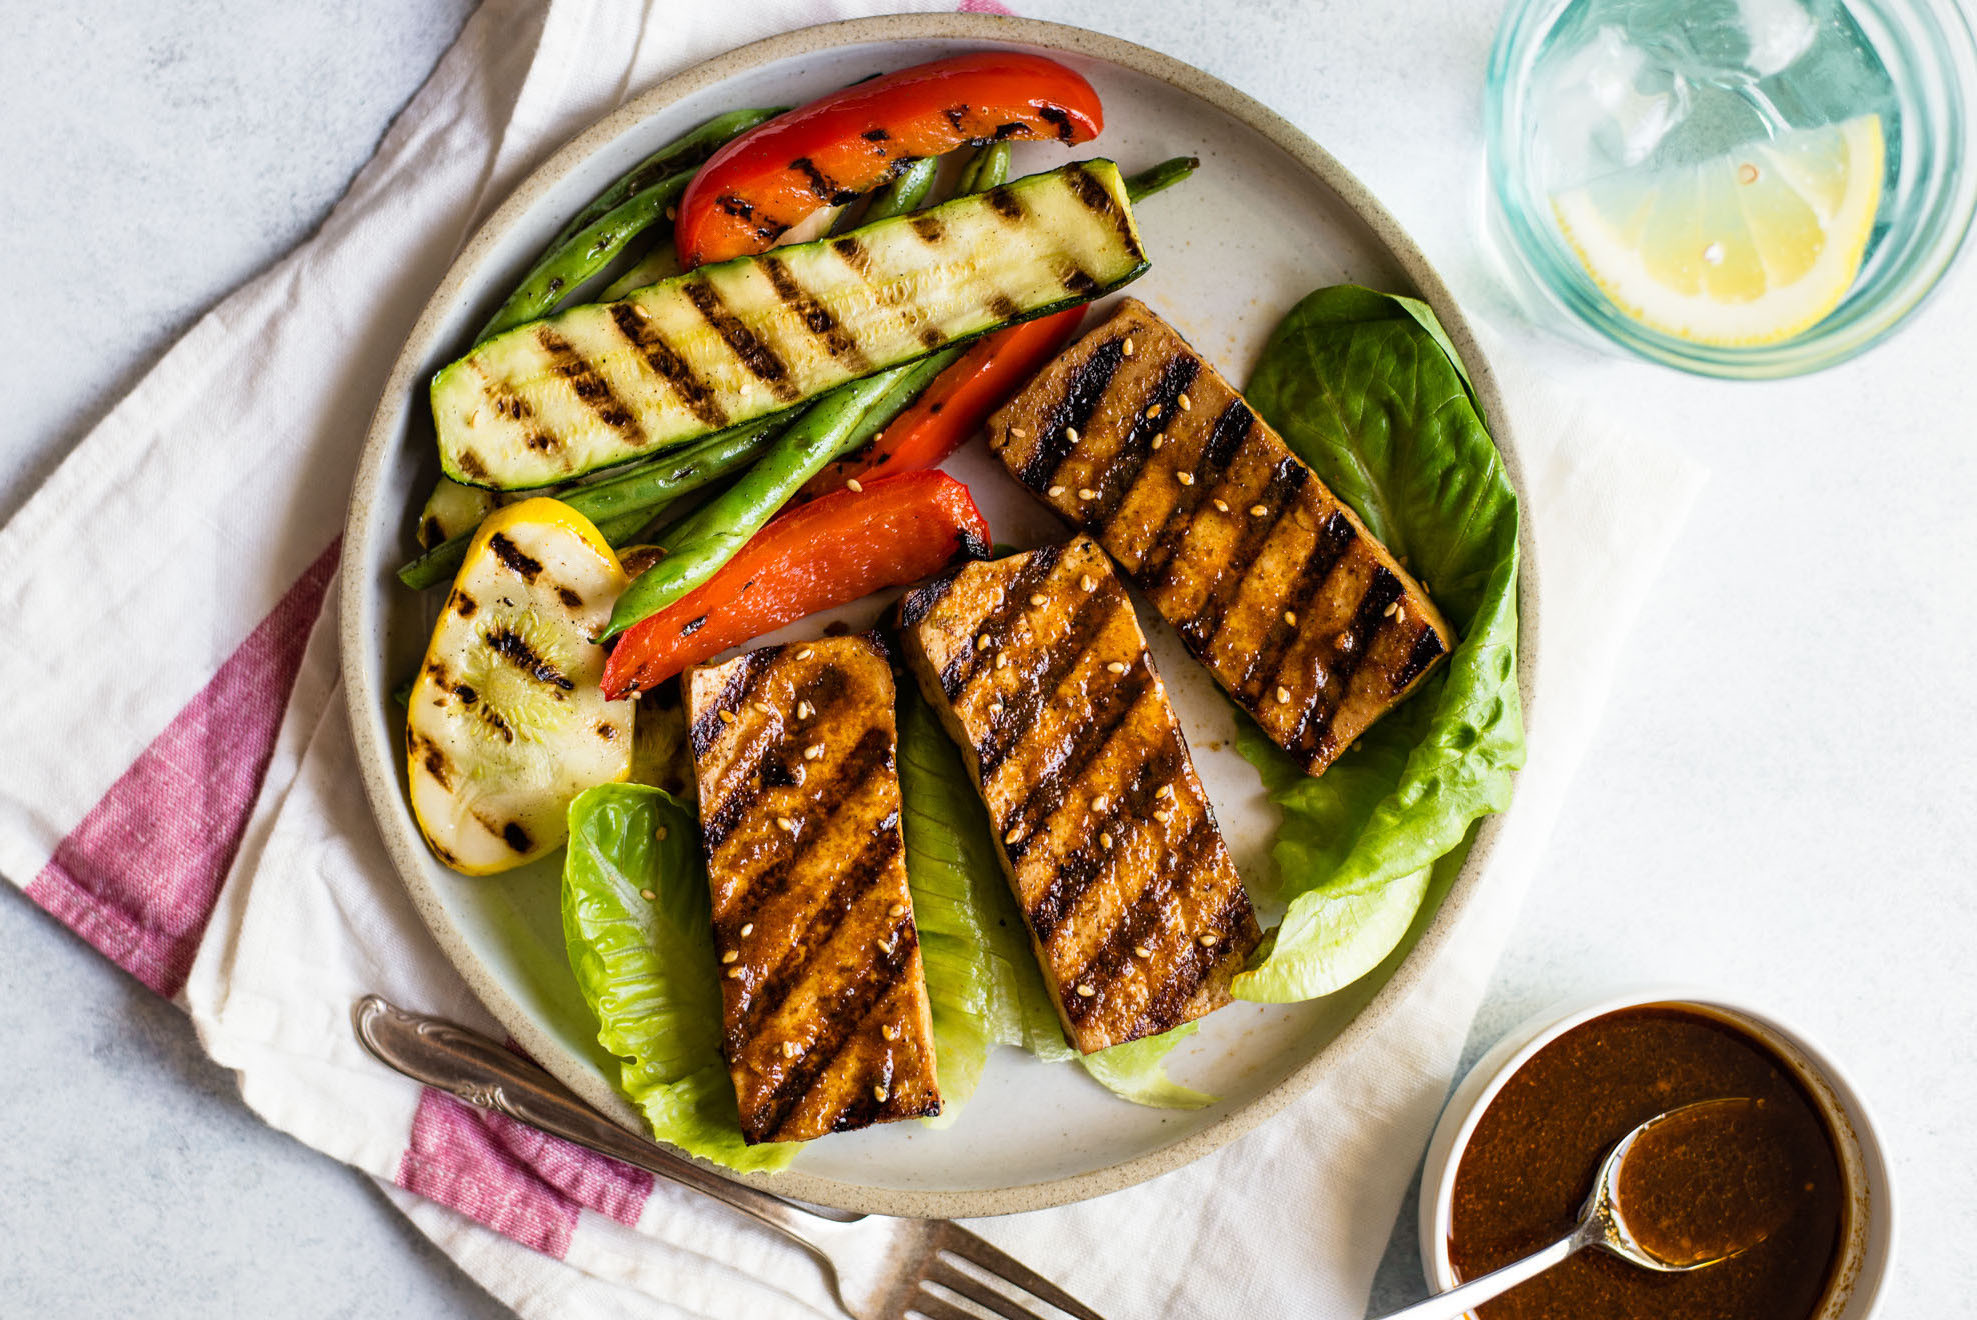 Vegetarian Grill Recipes
 15 of the Best Ve arian Grilling Recipes